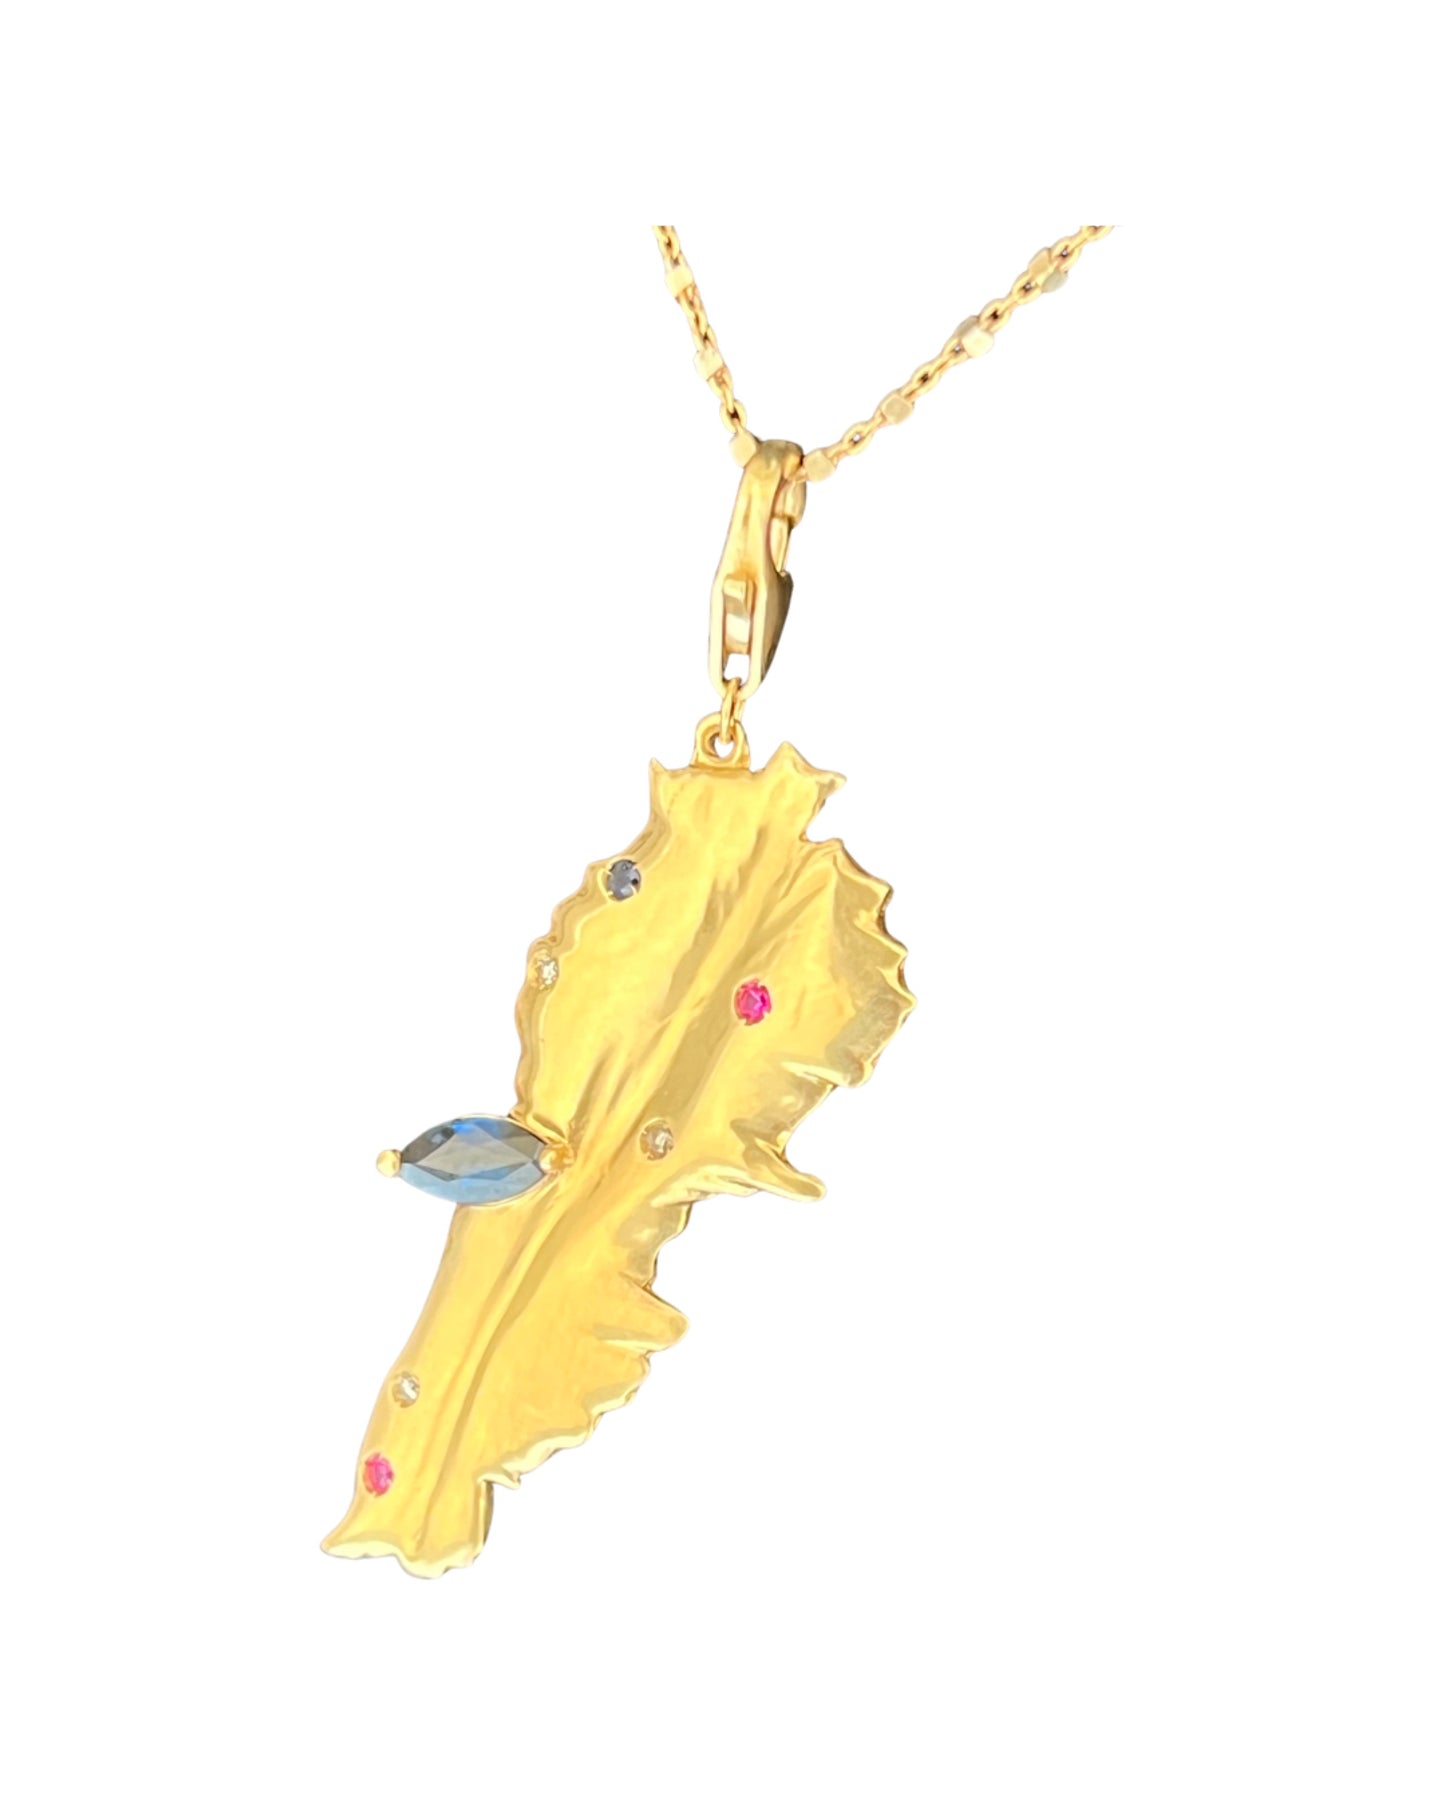 Lebanon map 3D charm with blue sapphire and diamonds  in yellow gold